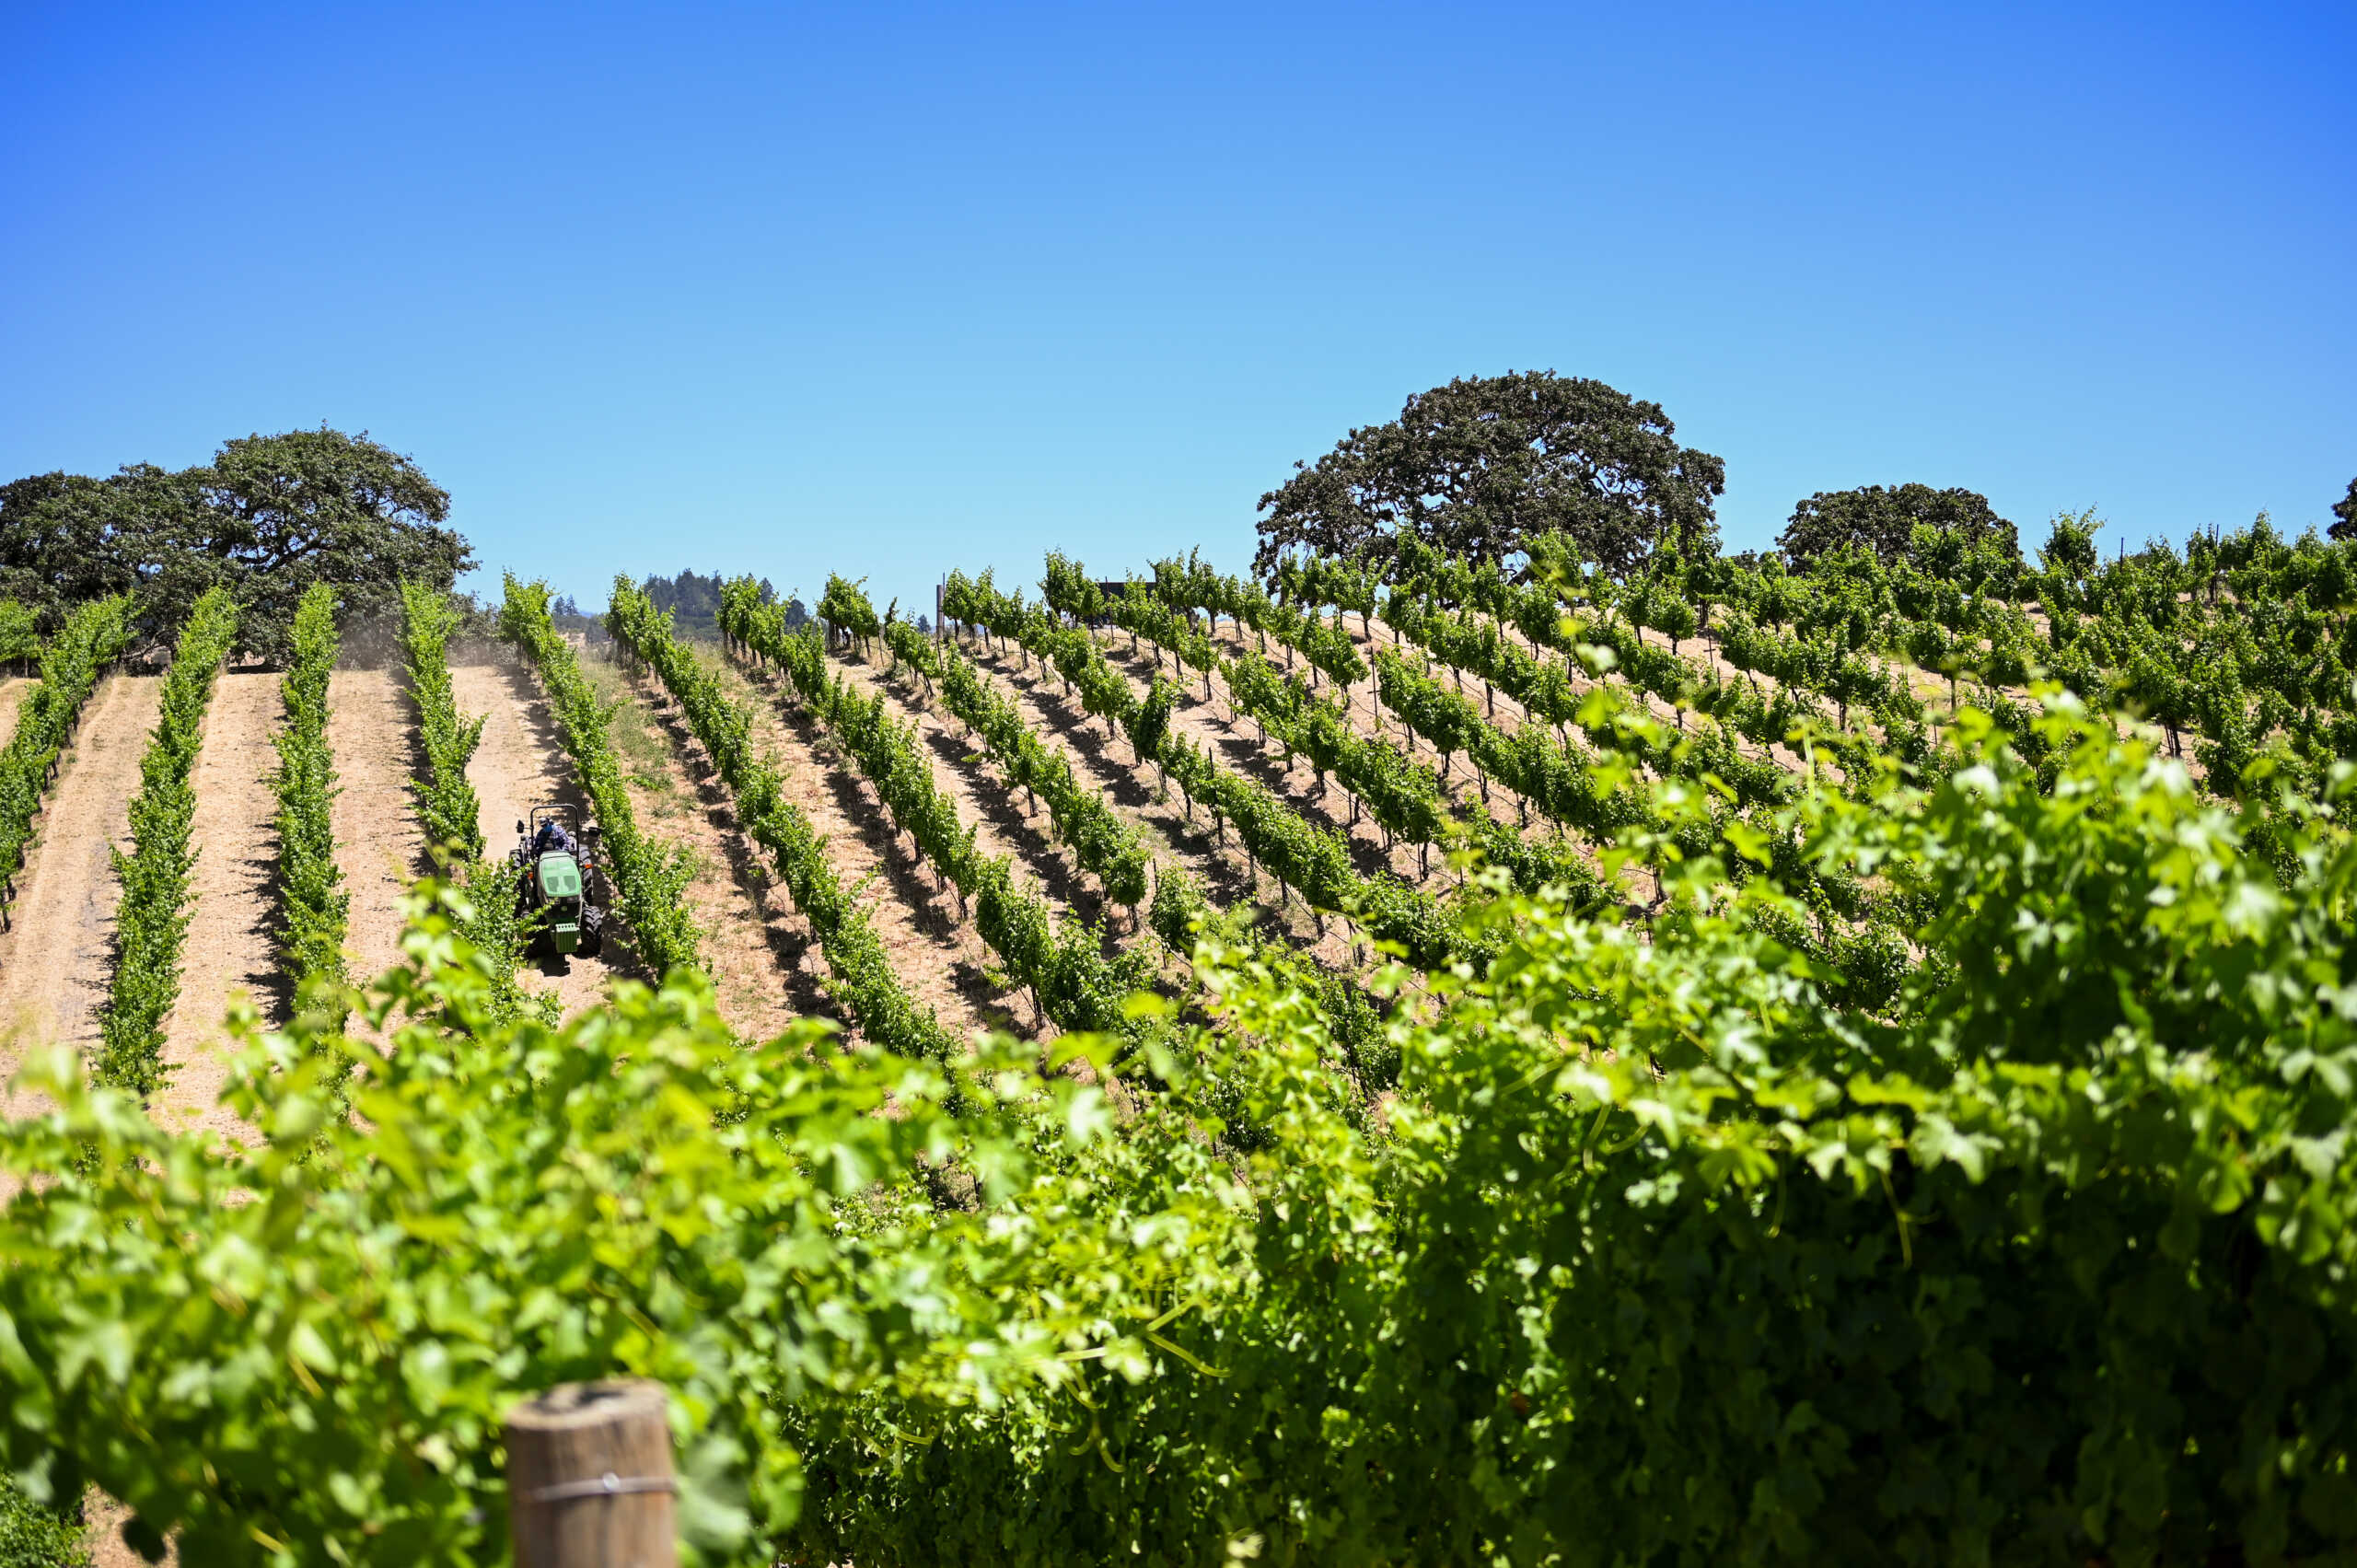 Rows of grapevines grow on a sunny, rolling vineyard with a tractor working between the rows and a clear blue sky overhead.